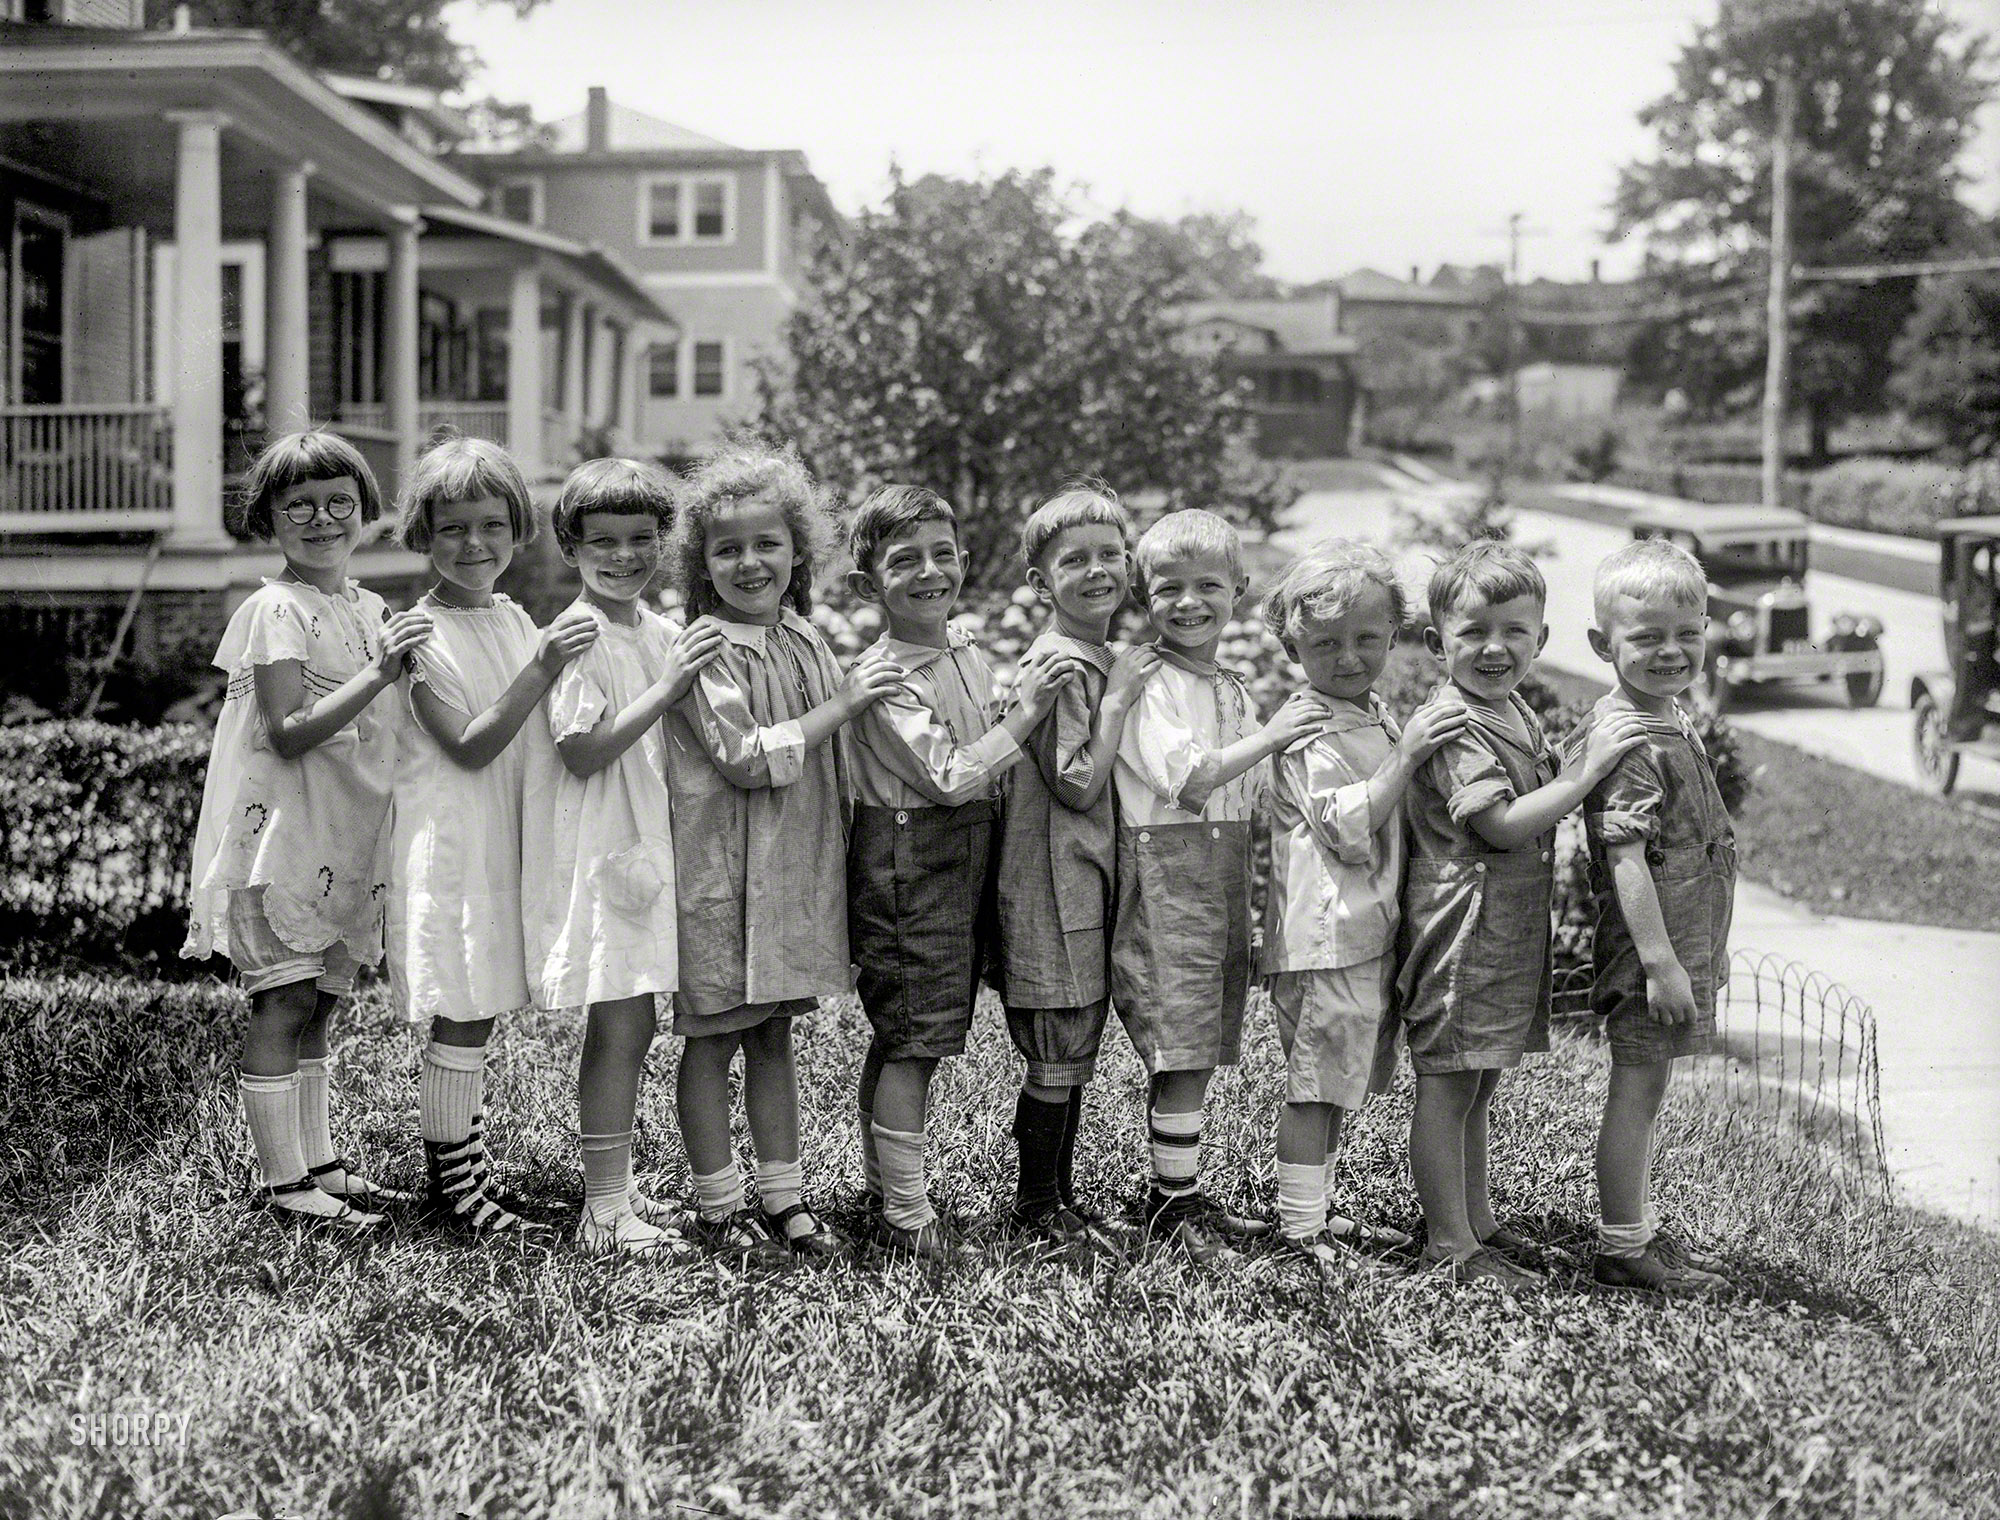 June 1925. Washington, D.C. "Takoma News." We need two more girls for the kiddie conga line. National Photo Co. Collection glass negative. View full size.